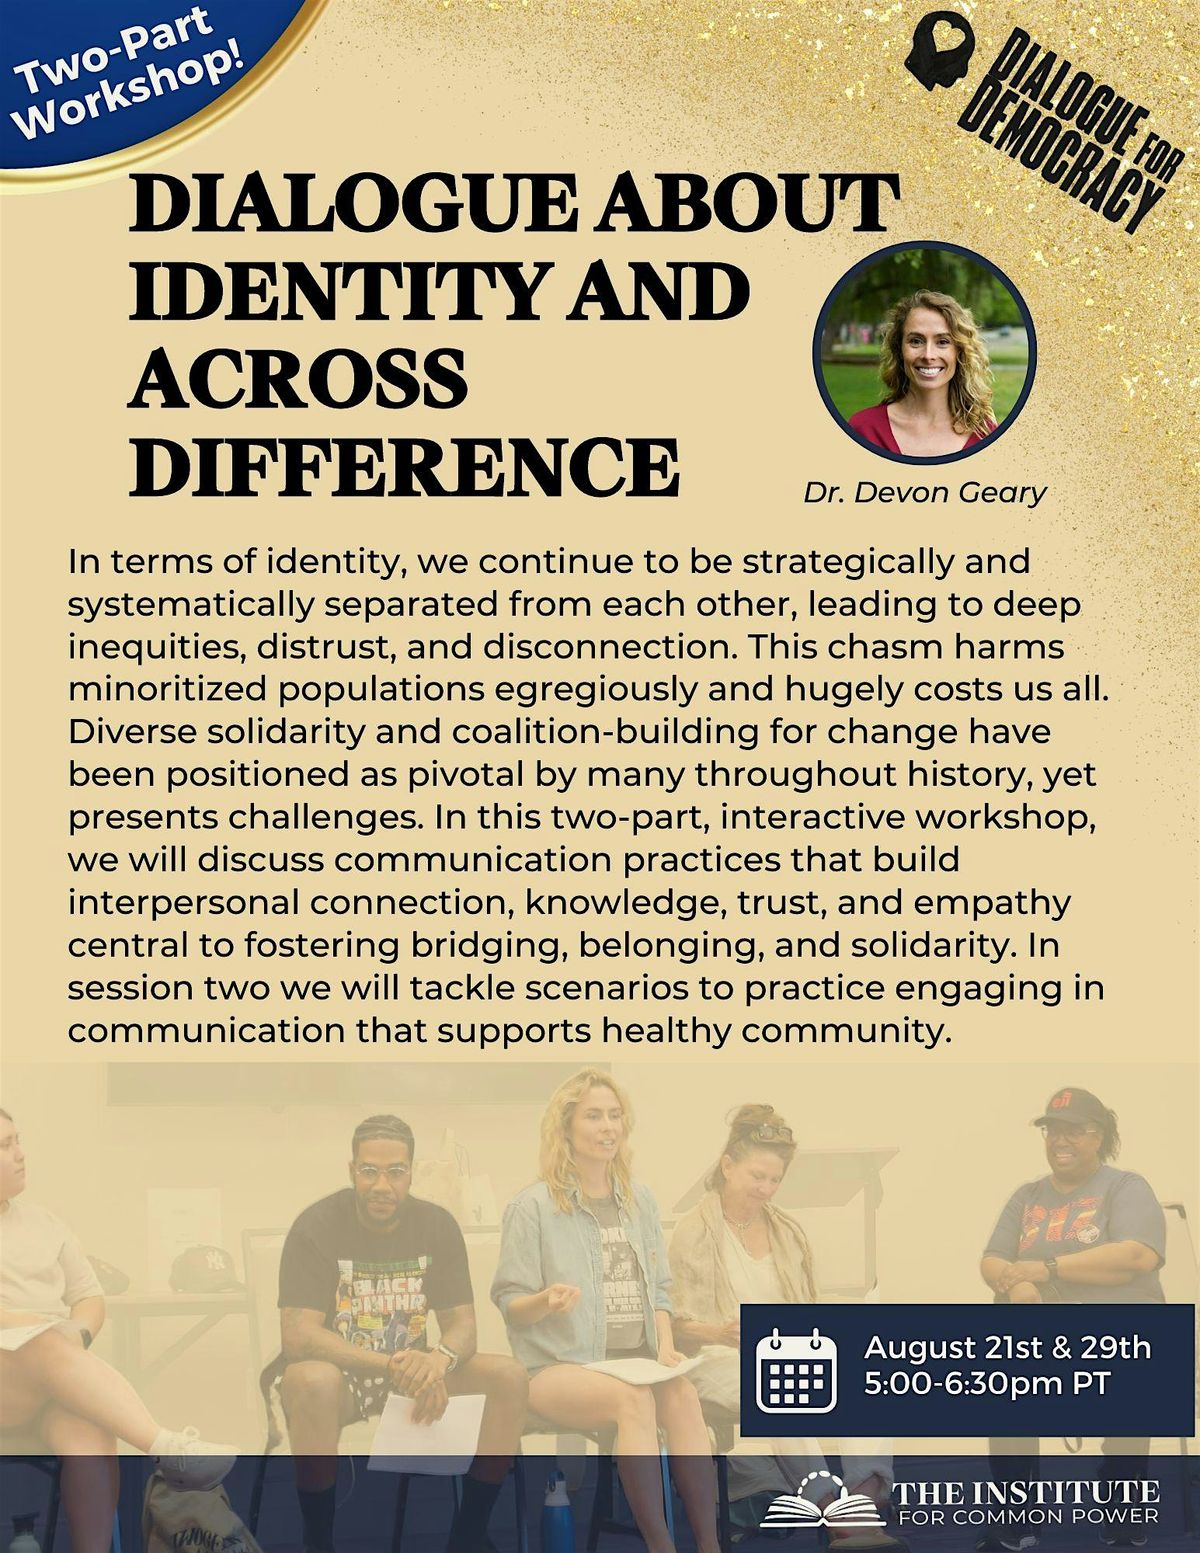 Dialogue About Identity and Across Difference